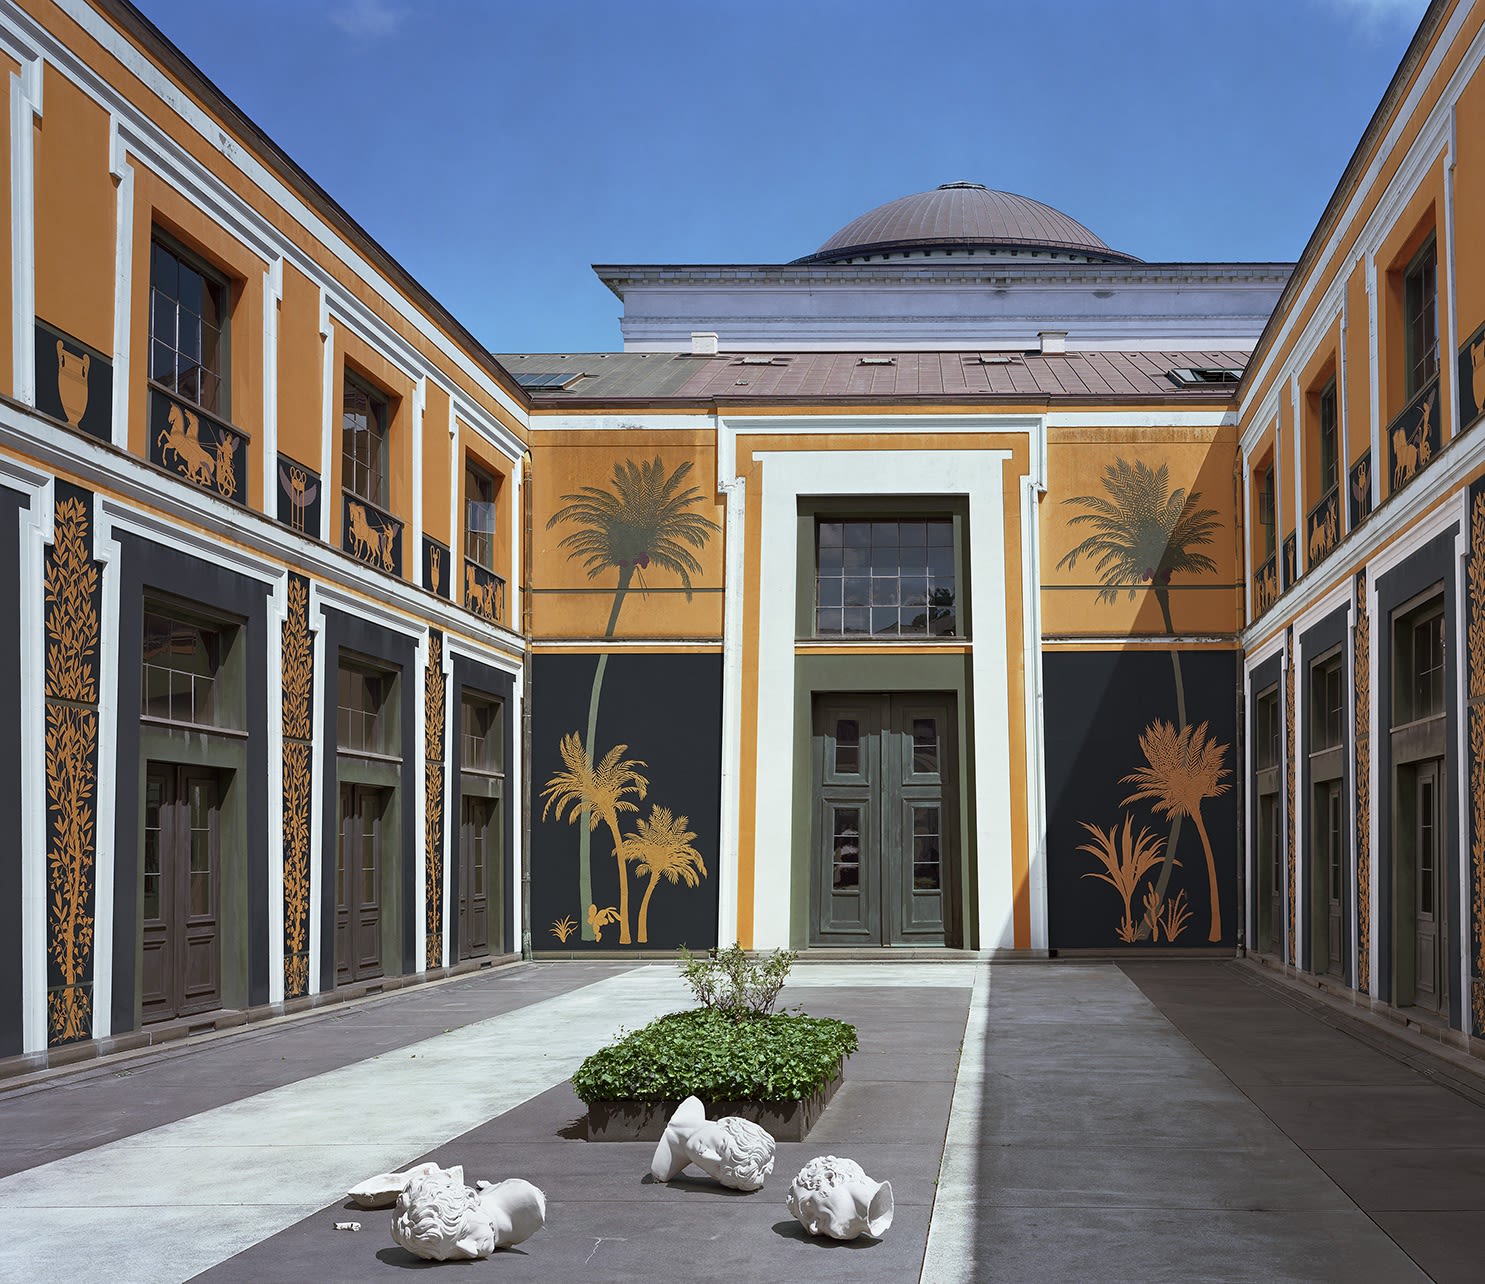 Thomas Bangsted, The Courtyard in Thorvaldsens Museum, 2018-2021